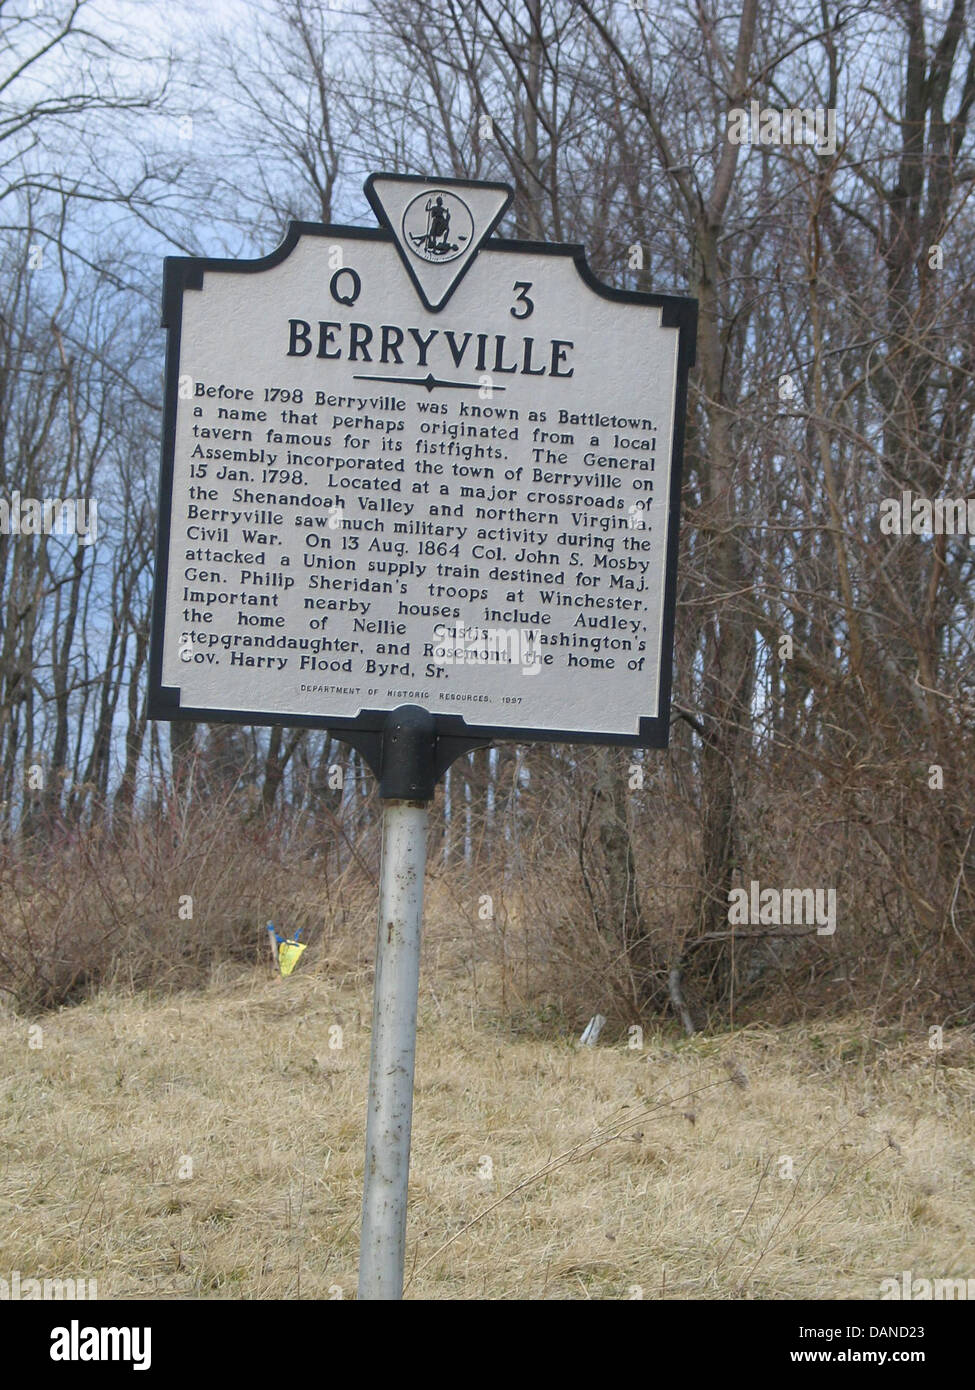 BERRYVILLE  Before 1798 Berryville was known as Battletown, a name that perhaps originated from a local tavern famous for its fi Stock Photo